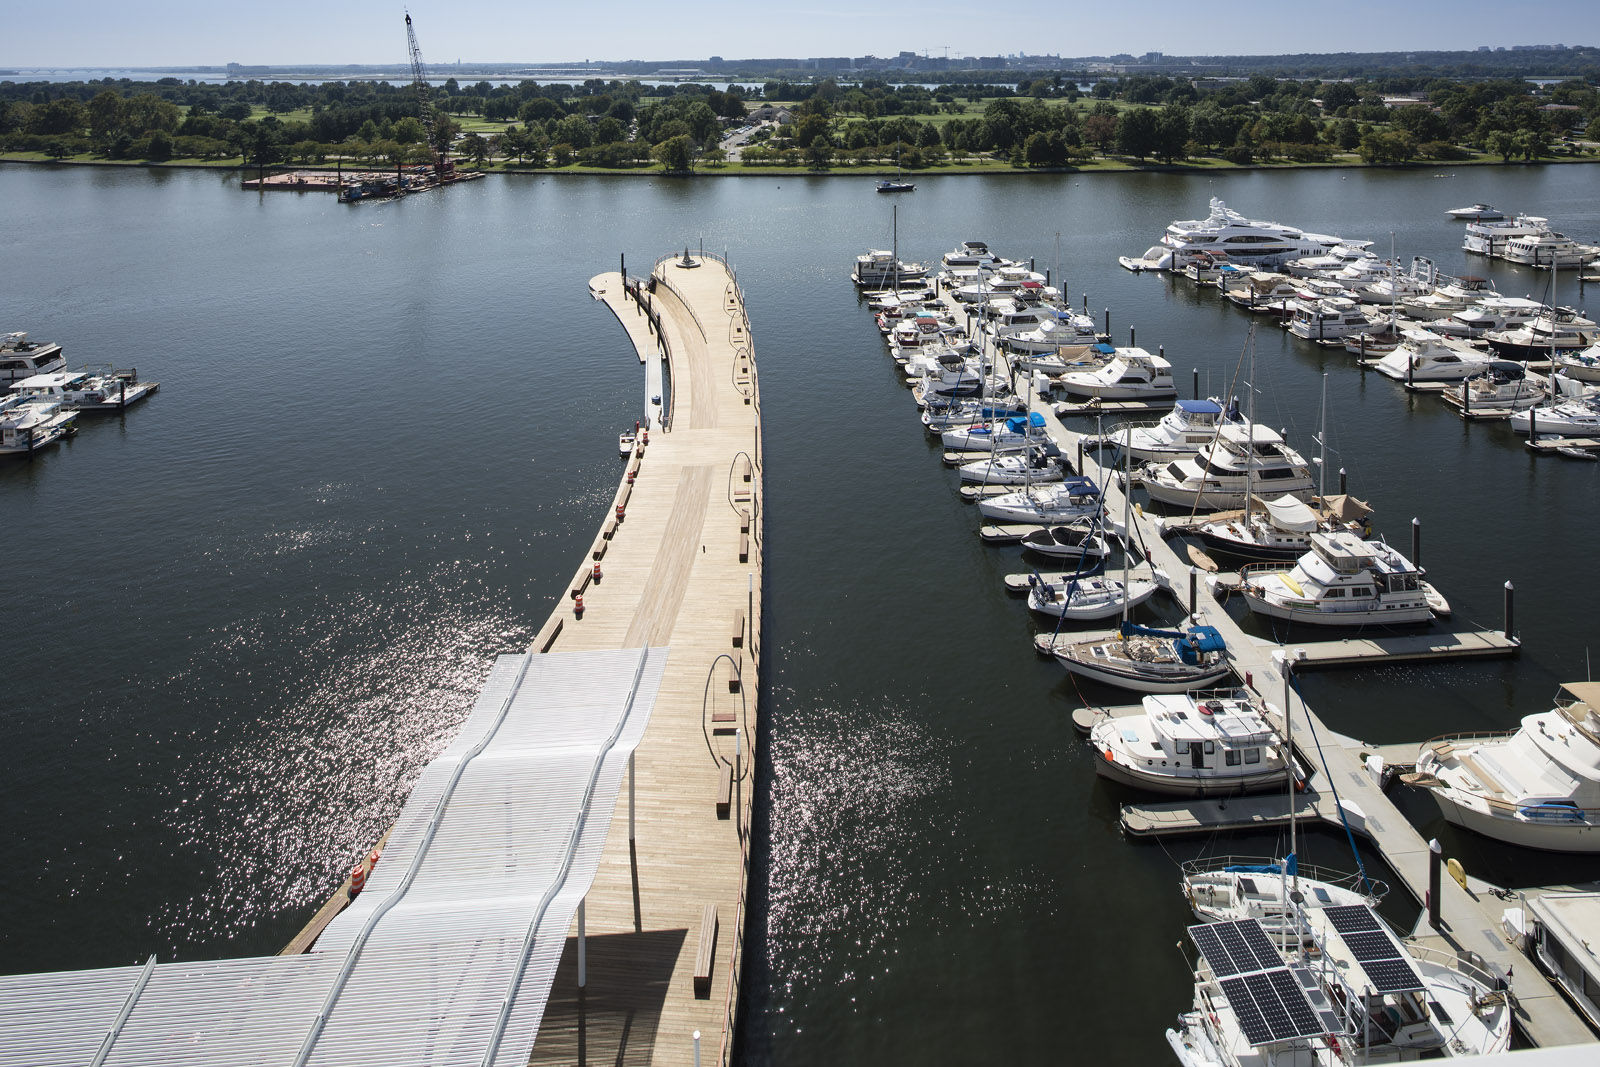 District Wharf’s Recreation Pier will be what connects people to the water, and one of its services is The Wharf Jitney, a small, electric-powered ferry that will shuttle people from The Wharf to East Potomac Park and Hains Point in about three minutes. (Courtesy Hoffman-Madison)